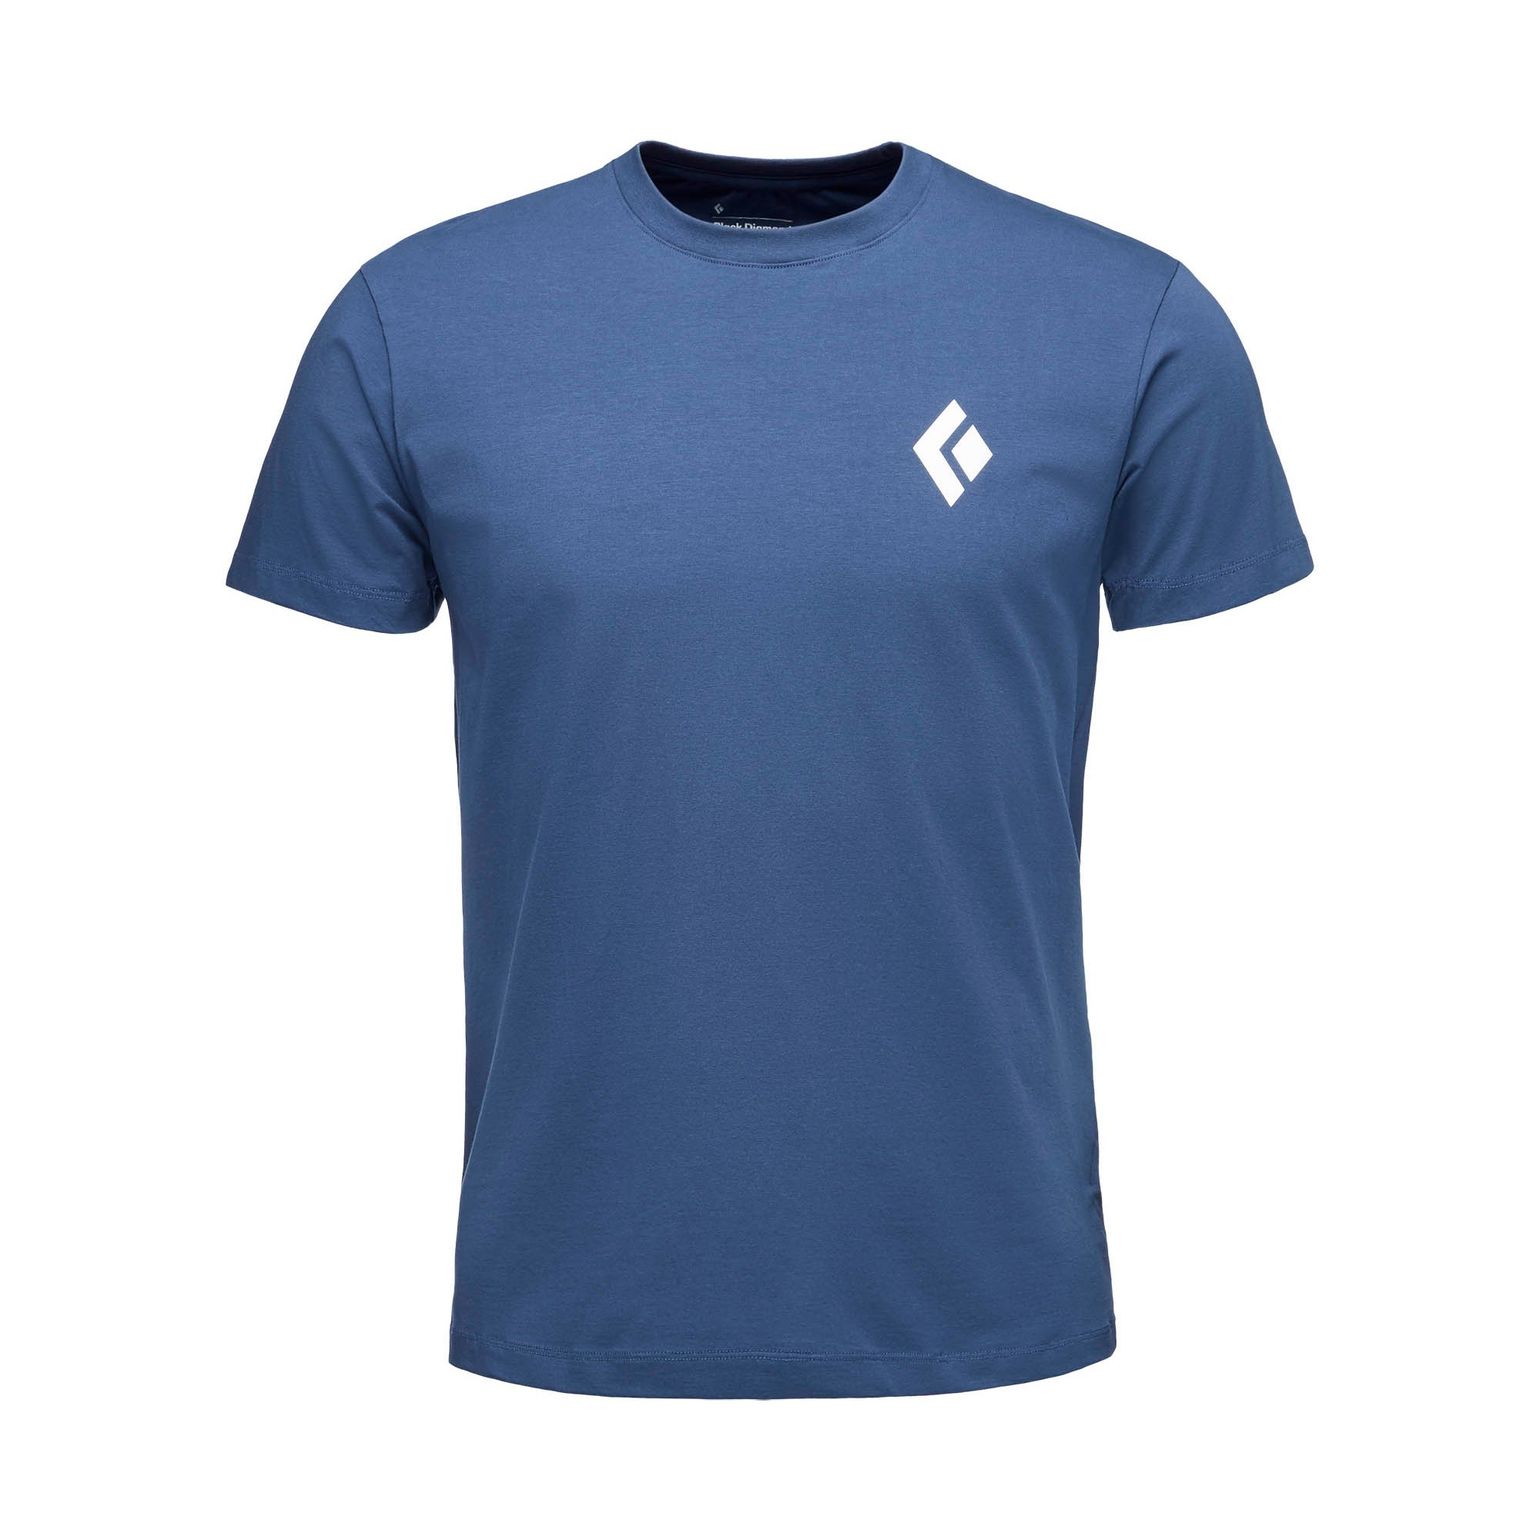 Men's SS Tee Equipment For Alpinist Ink Blue